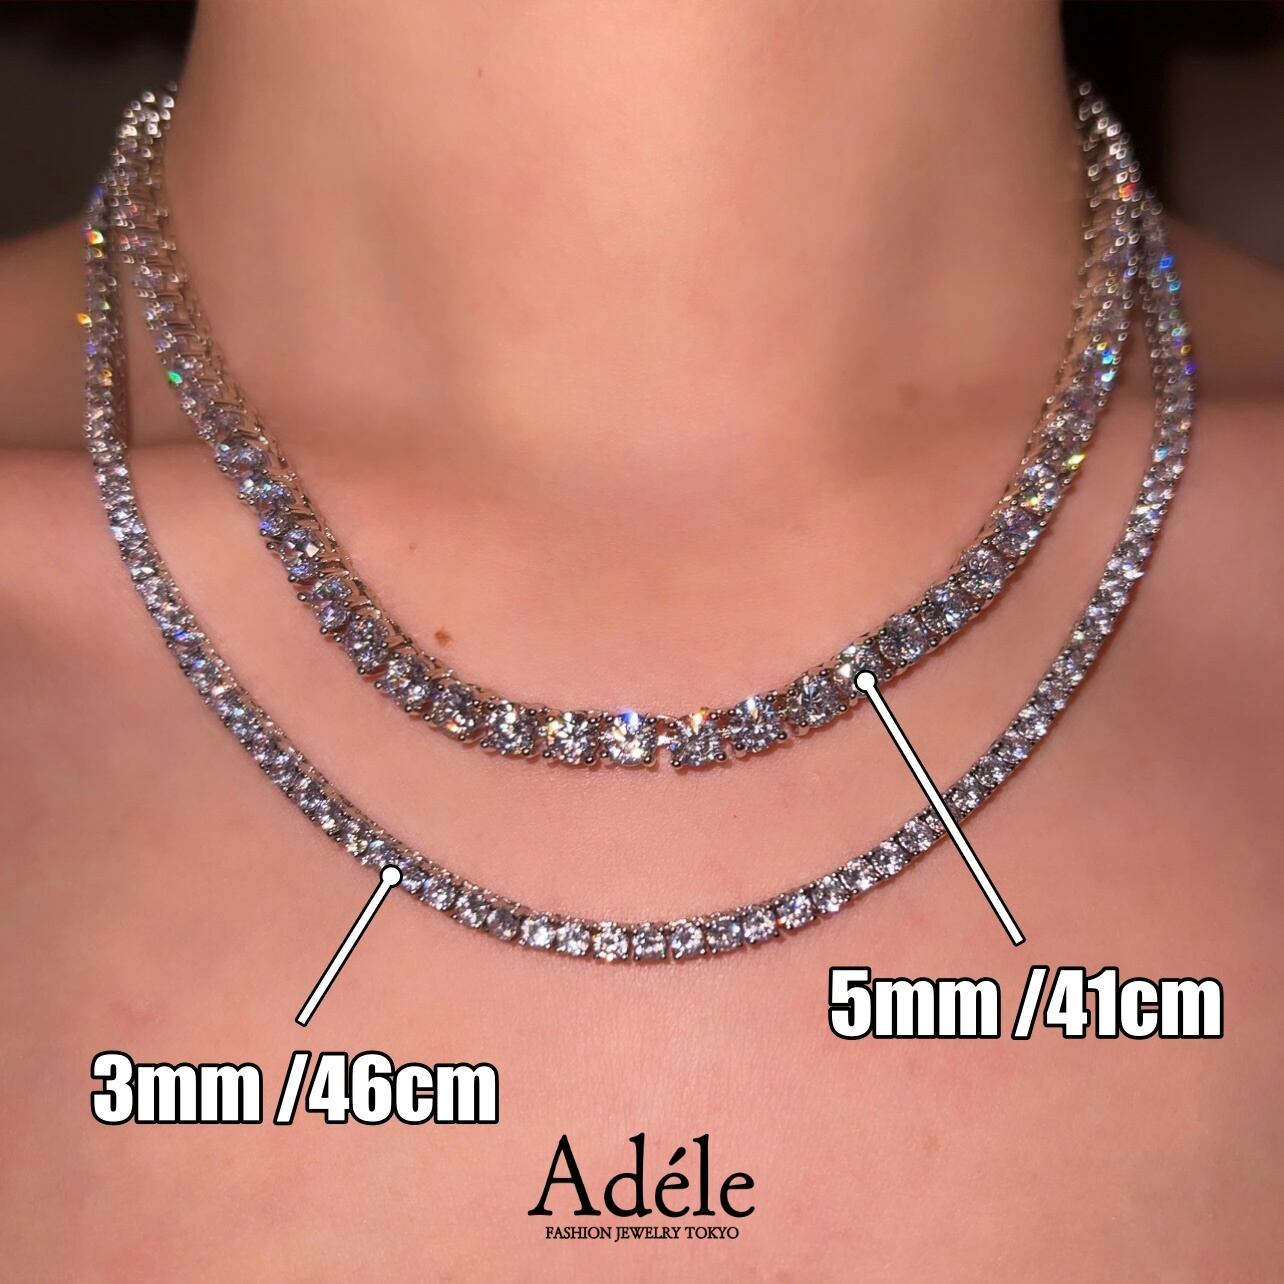 【Bérénice 3mm】ネックレス necklace 3mm 41cm 46cm 16inc